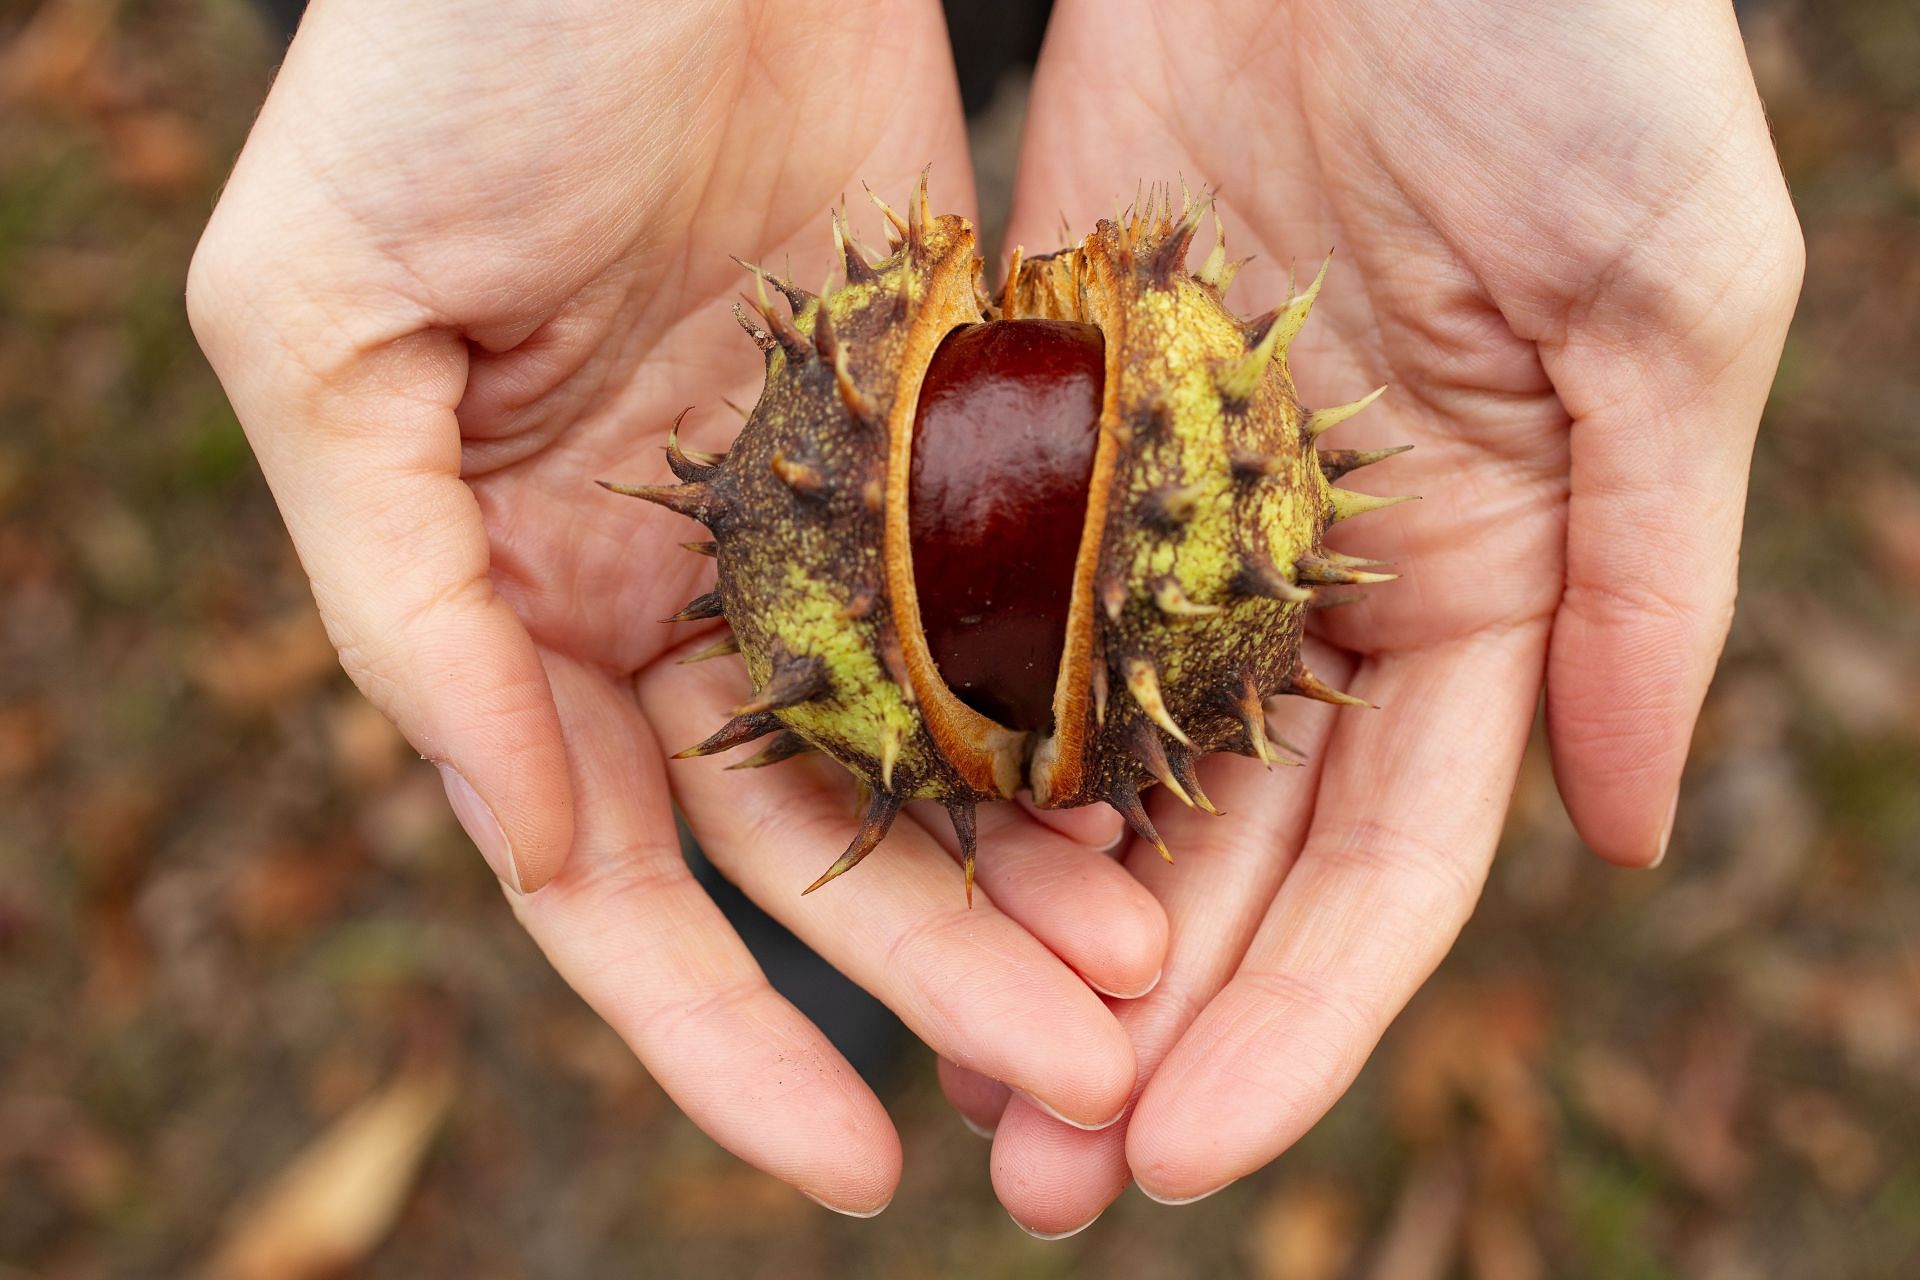 Chestnuts: A Healthy Snack for Pre- and Post-Workout Fuel. (Image via Pexels)